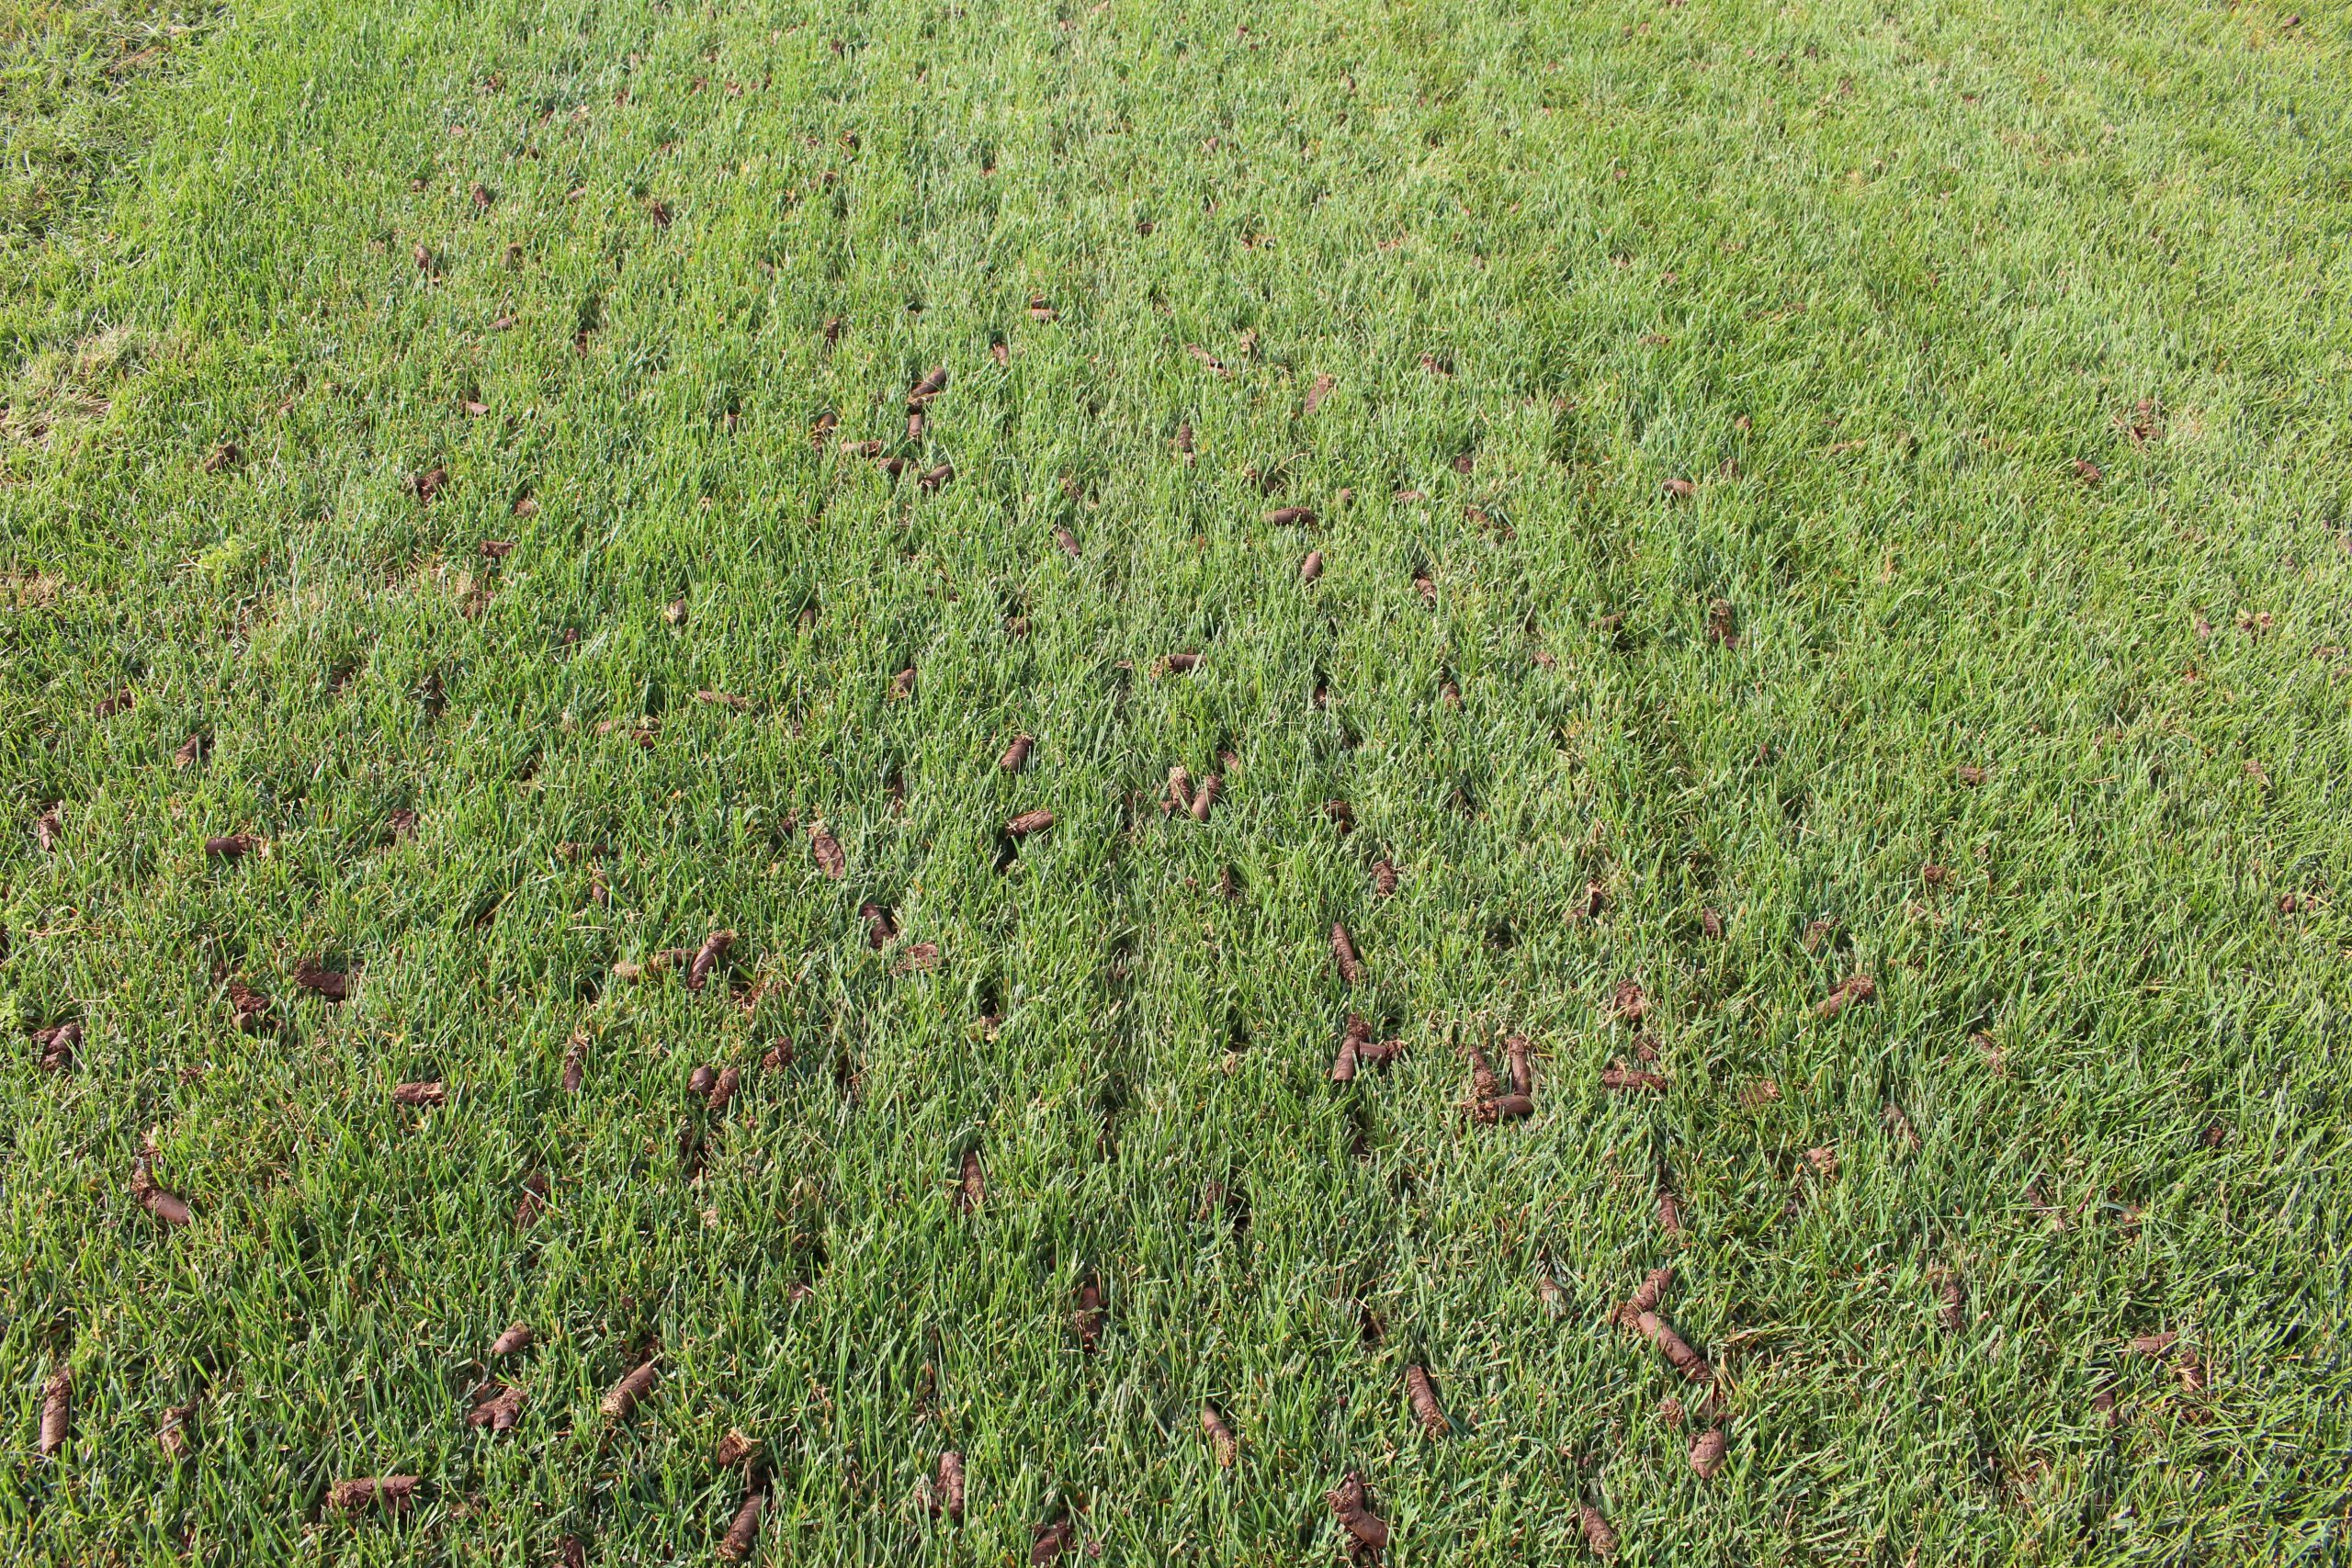 Blog Benefits of Core overseeding scaled